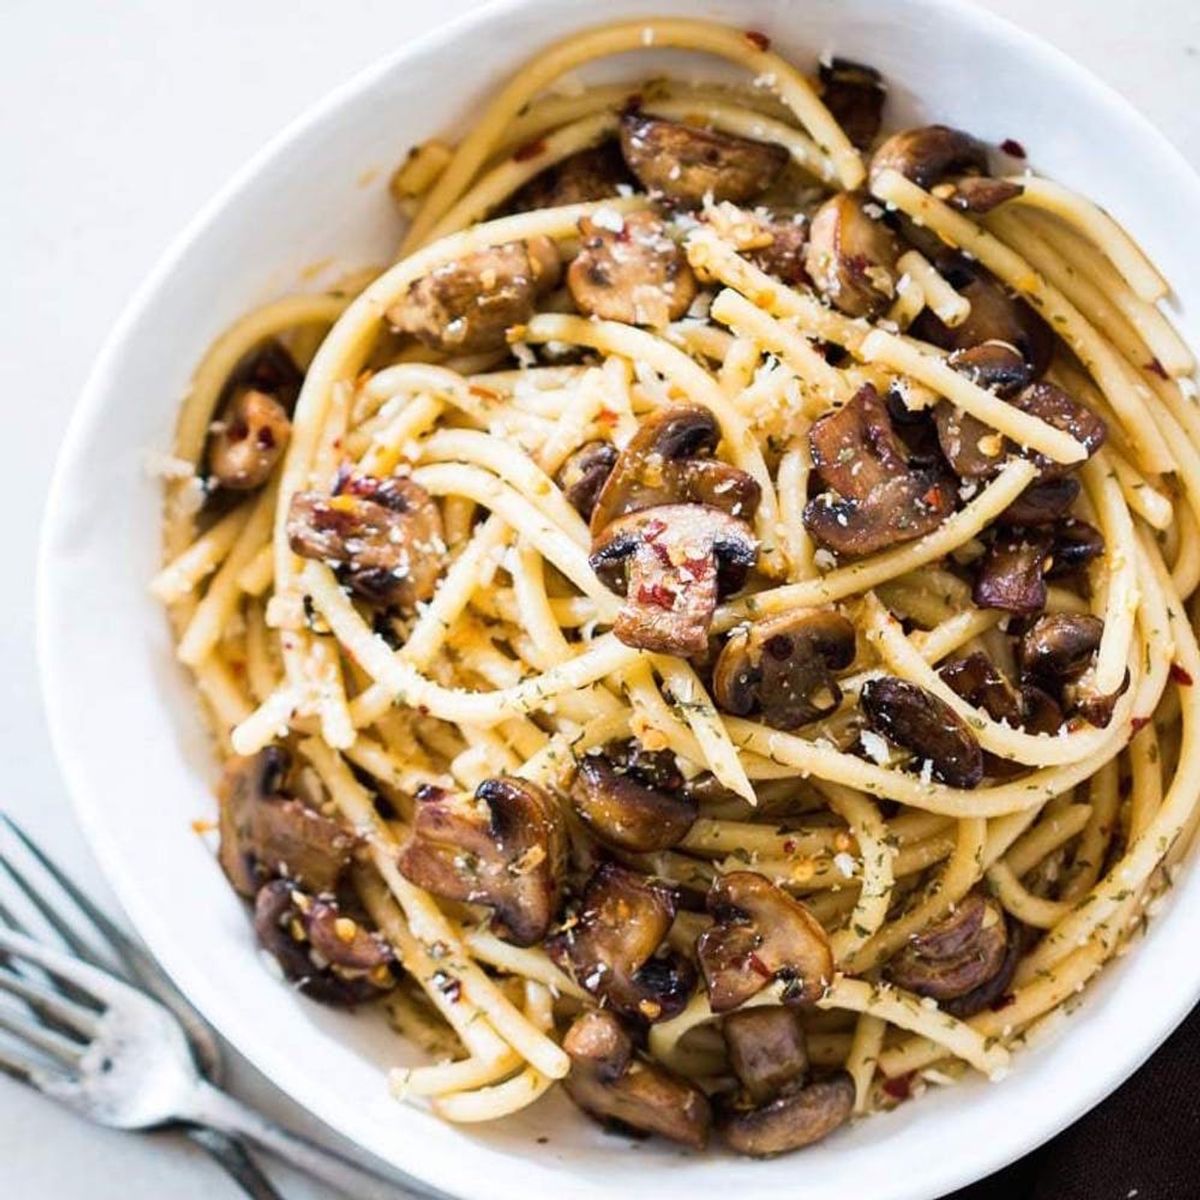 15 Pasta Recipes for Speedy 15-Minute Weeknight Dinners